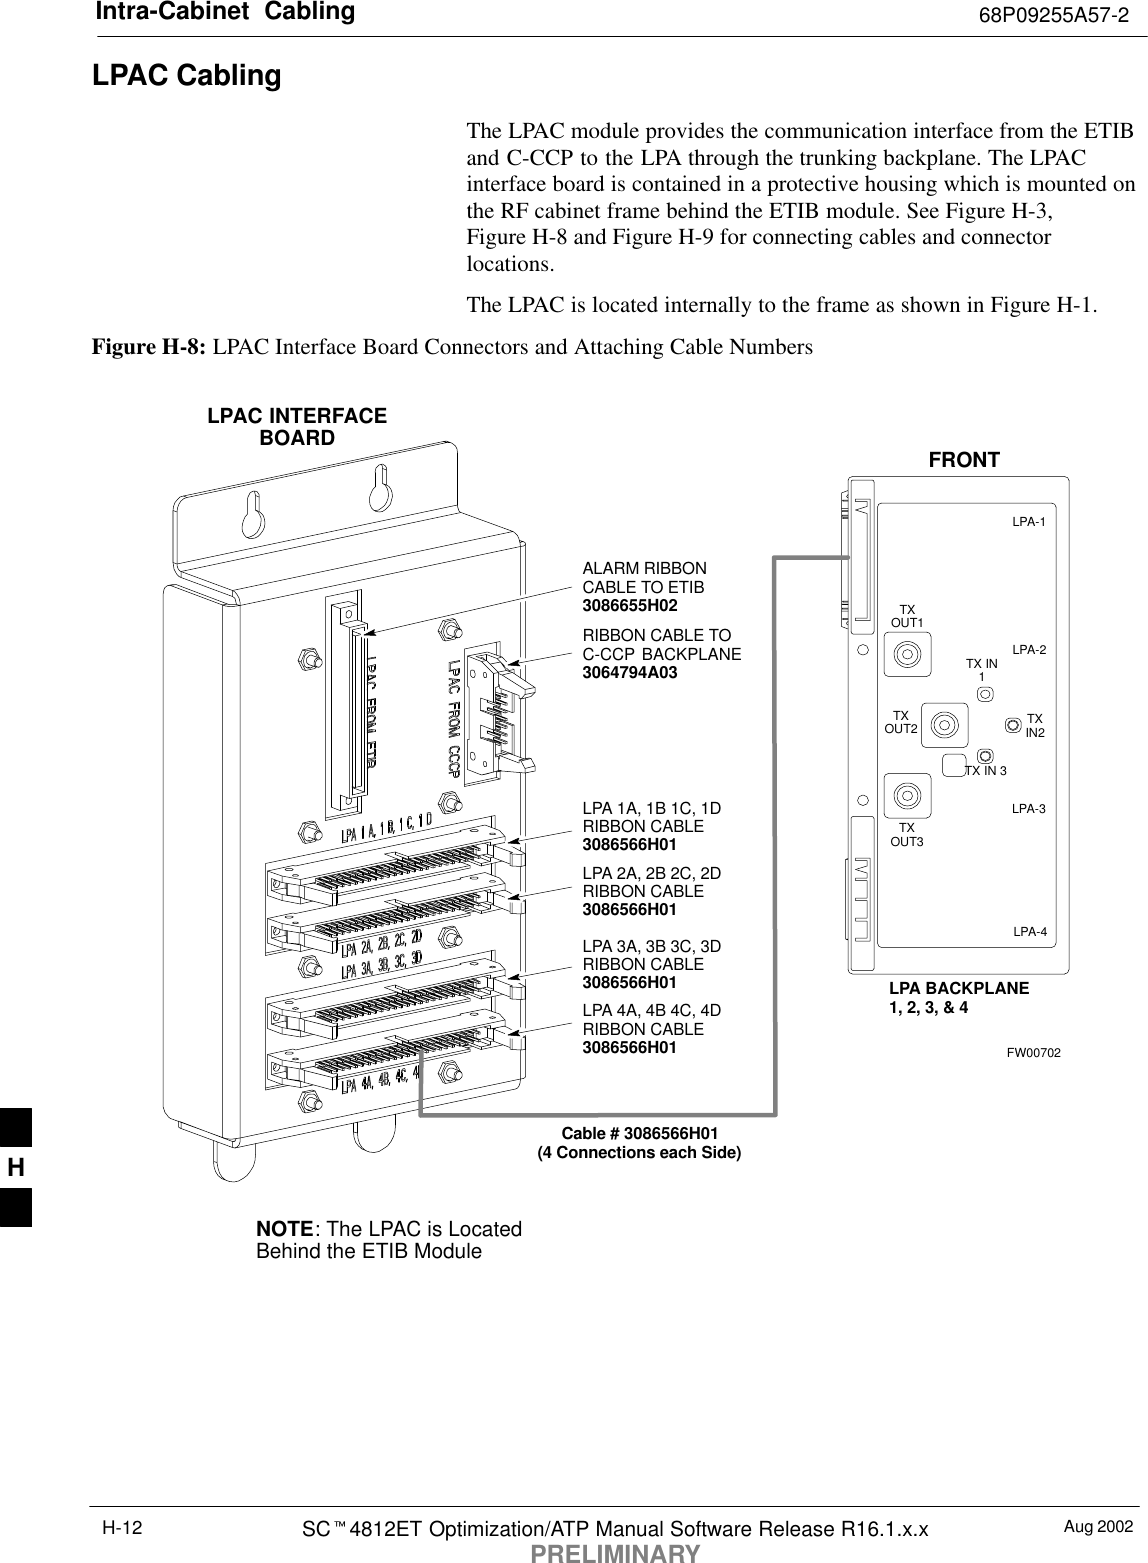 Intra-Cabinet  Cabling 68P09255A57-2Aug 2002SCt4812ET Optimization/ATP Manual Software Release R16.1.x.xPRELIMINARYH-12LPAC Cabling The LPAC module provides the communication interface from the ETIBand C-CCP to the LPA through the trunking backplane. The LPACinterface board is contained in a protective housing which is mounted onthe RF cabinet frame behind the ETIB module. See Figure H-3,Figure H-8 and Figure H-9 for connecting cables and connectorlocations.The LPAC is located internally to the frame as shown in Figure H-1.Figure H-8: LPAC Interface Board Connectors and Attaching Cable NumbersNOTE: The LPAC is LocatedBehind the ETIB ModuleLPAC INTERFACEBOARDLPA 1A, 1B 1C, 1DRIBBON CABLE3086566H01LPA 2A, 2B 2C, 2DRIBBON CABLE3086566H01LPA 3A, 3B 3C, 3DRIBBON CABLE3086566H01LPA 4A, 4B 4C, 4DRIBBON CABLE3086566H01LPA-1LPA-2LPA-3LPA-4FRONTTXOUT1TXOUT2TXOUT3TX IN 3TXIN2TX IN1LPA BACKPLANE1, 2, 3, &amp; 4Cable # 3086566H01(4 Connections each Side)ALARM RIBBONCABLE TO ETIB3086655H02RIBBON CABLE TOC-CCP BACKPLANE3064794A03FW00702H